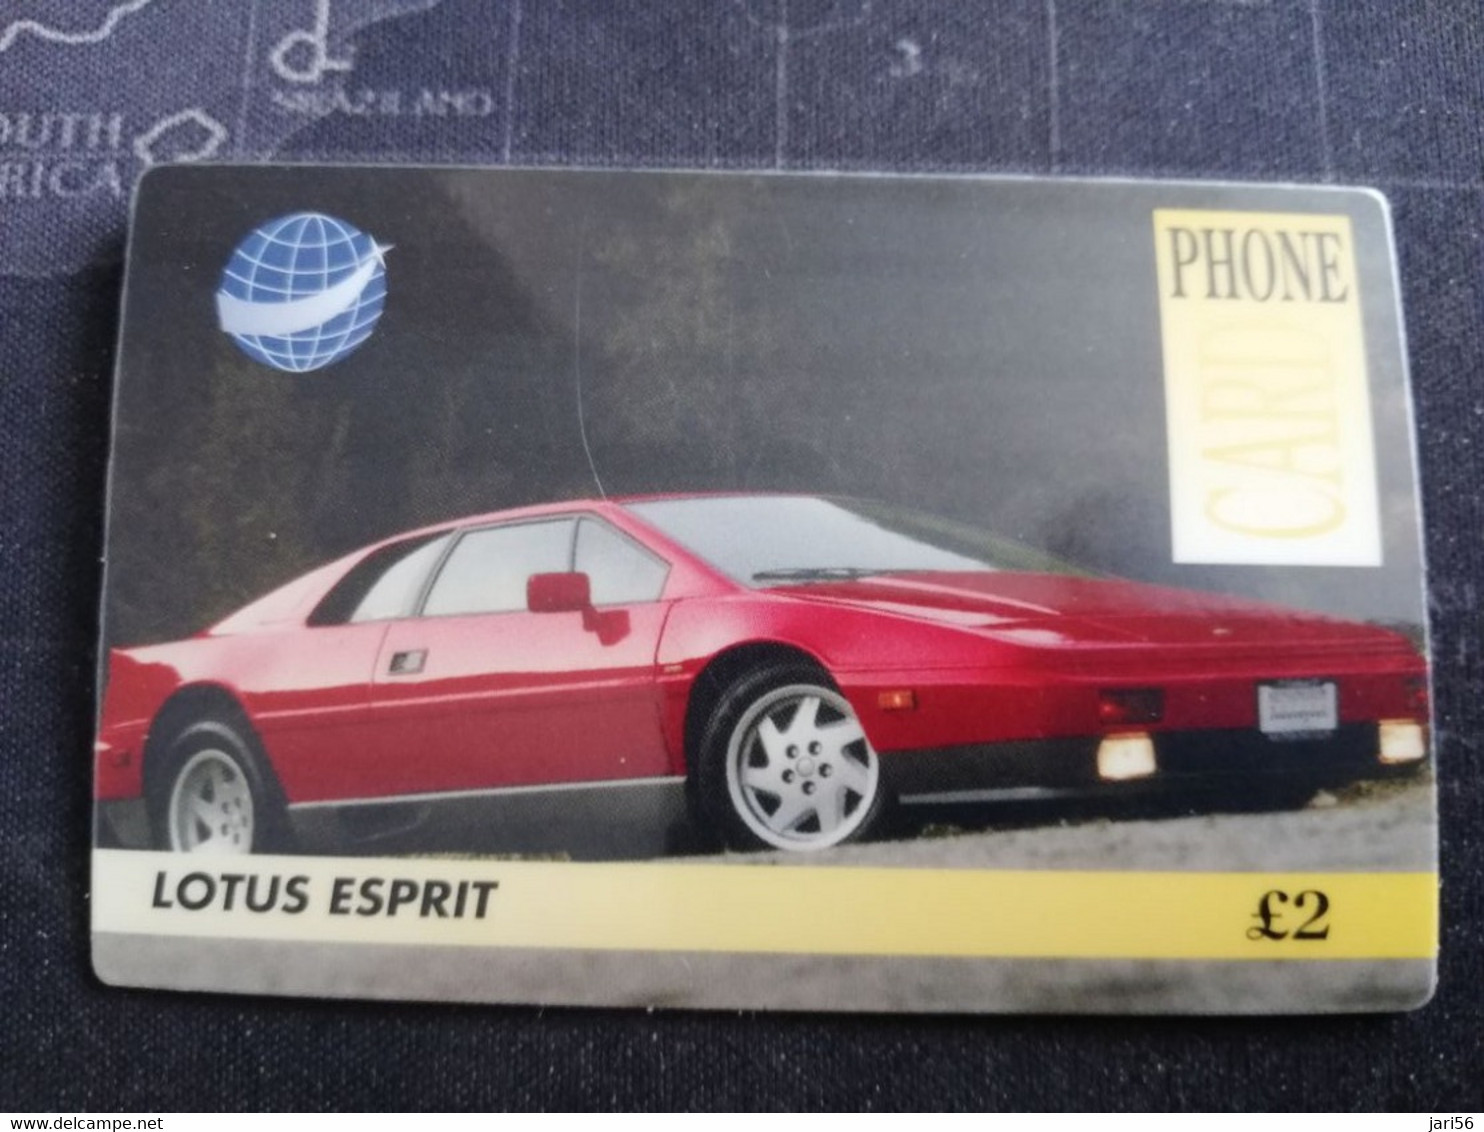 GREAT BRITAIN   2 POUND  LOTUS ESPRIT     AUTOMOBILES/RACING CARS /SPORT CARS  PREPAID      **3264** - Collections